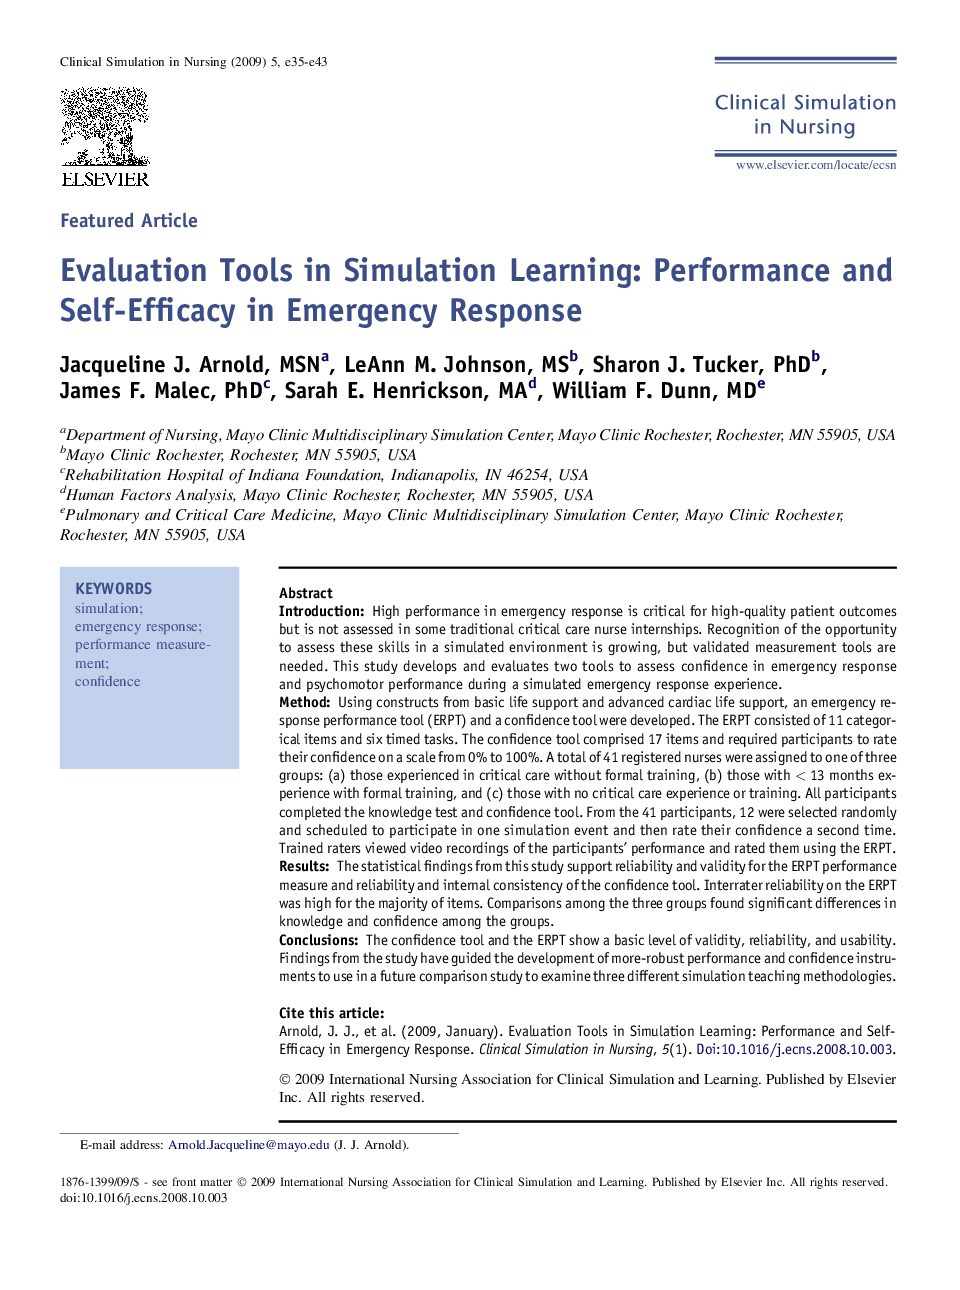 Evaluation Tools in Simulation Learning: Performance and Self-Efficacy in Emergency Response 